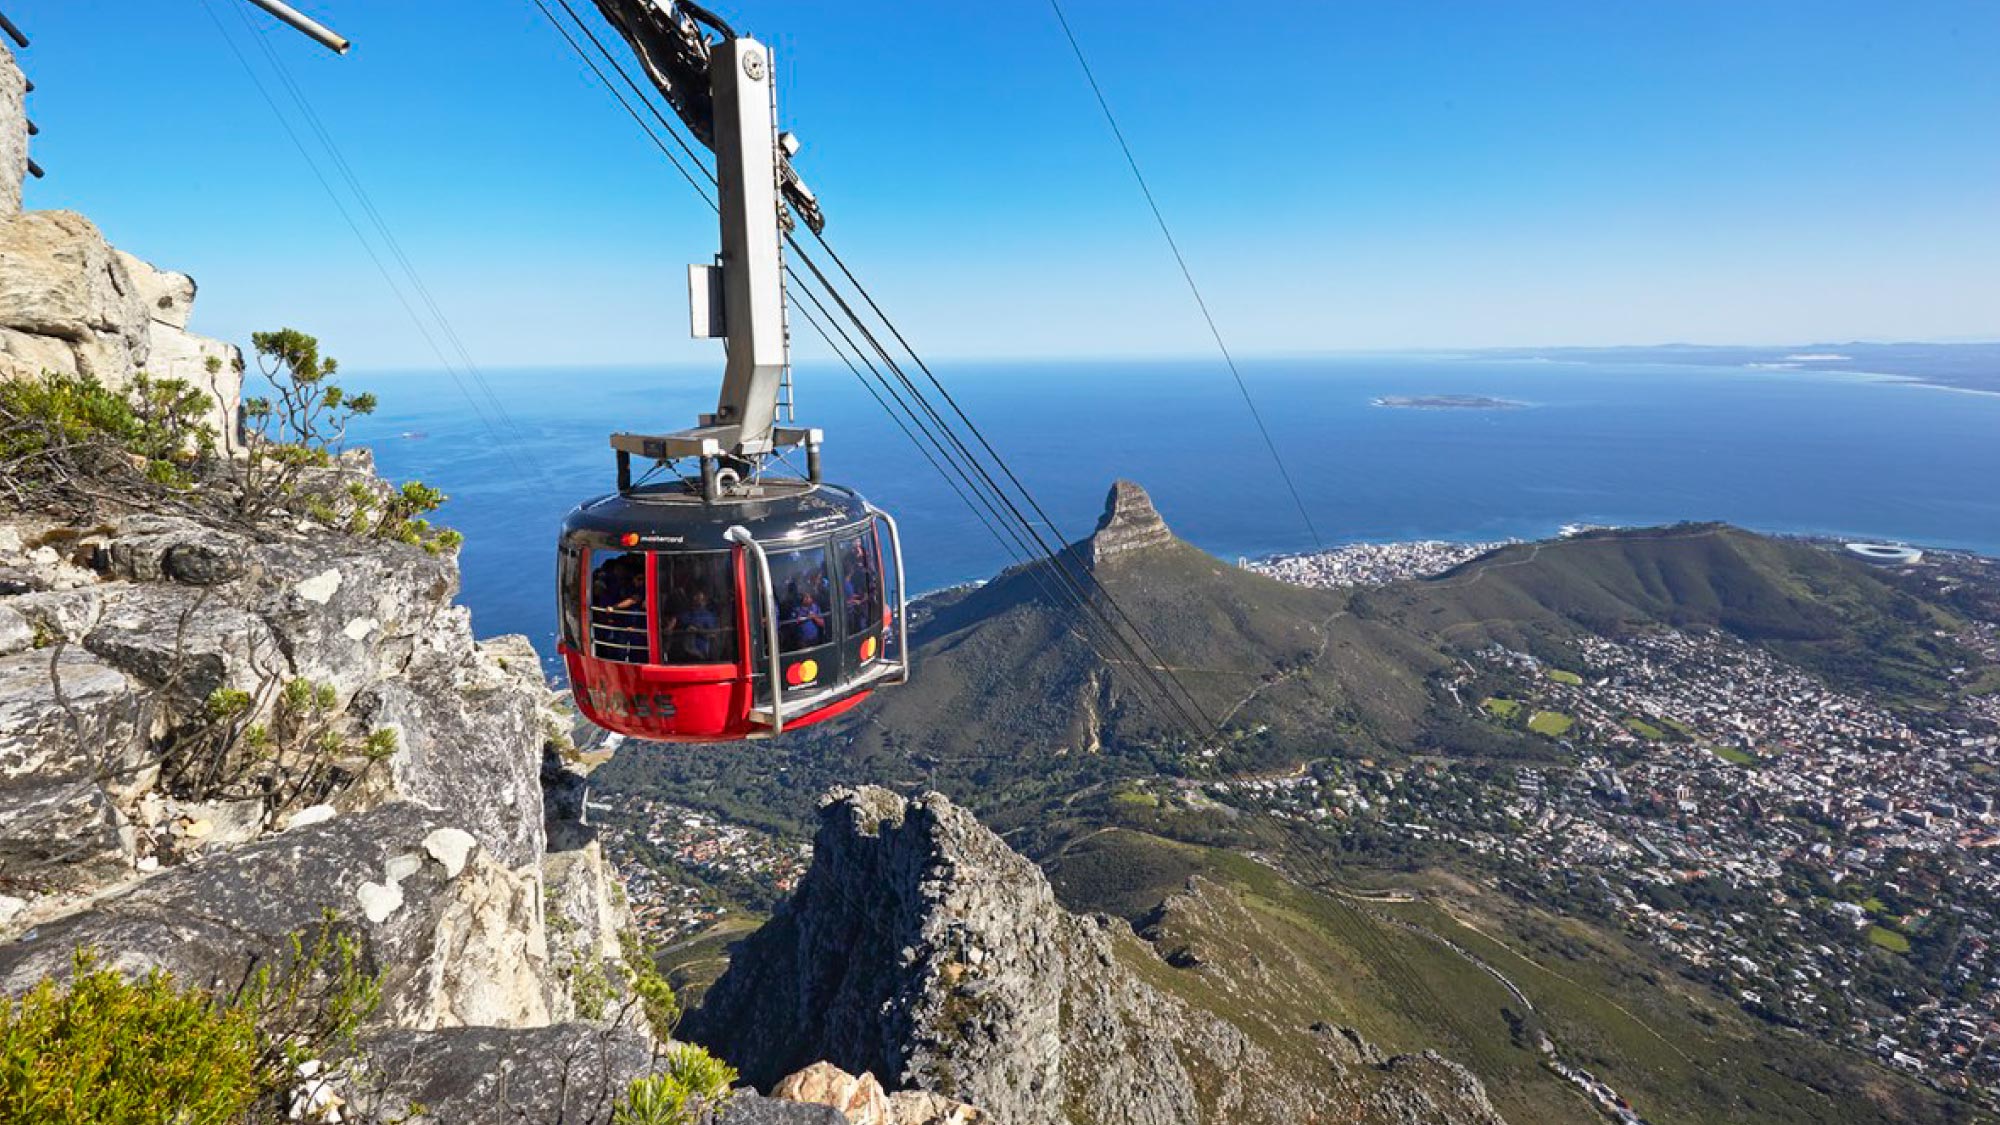 Discover Cape Town from the skies on a pilot's journey, capturing the scenic beauty of the city. Enjoy an encounter with penguins on the beach and take a cable car ride up Table Mountain for stunning vistas.